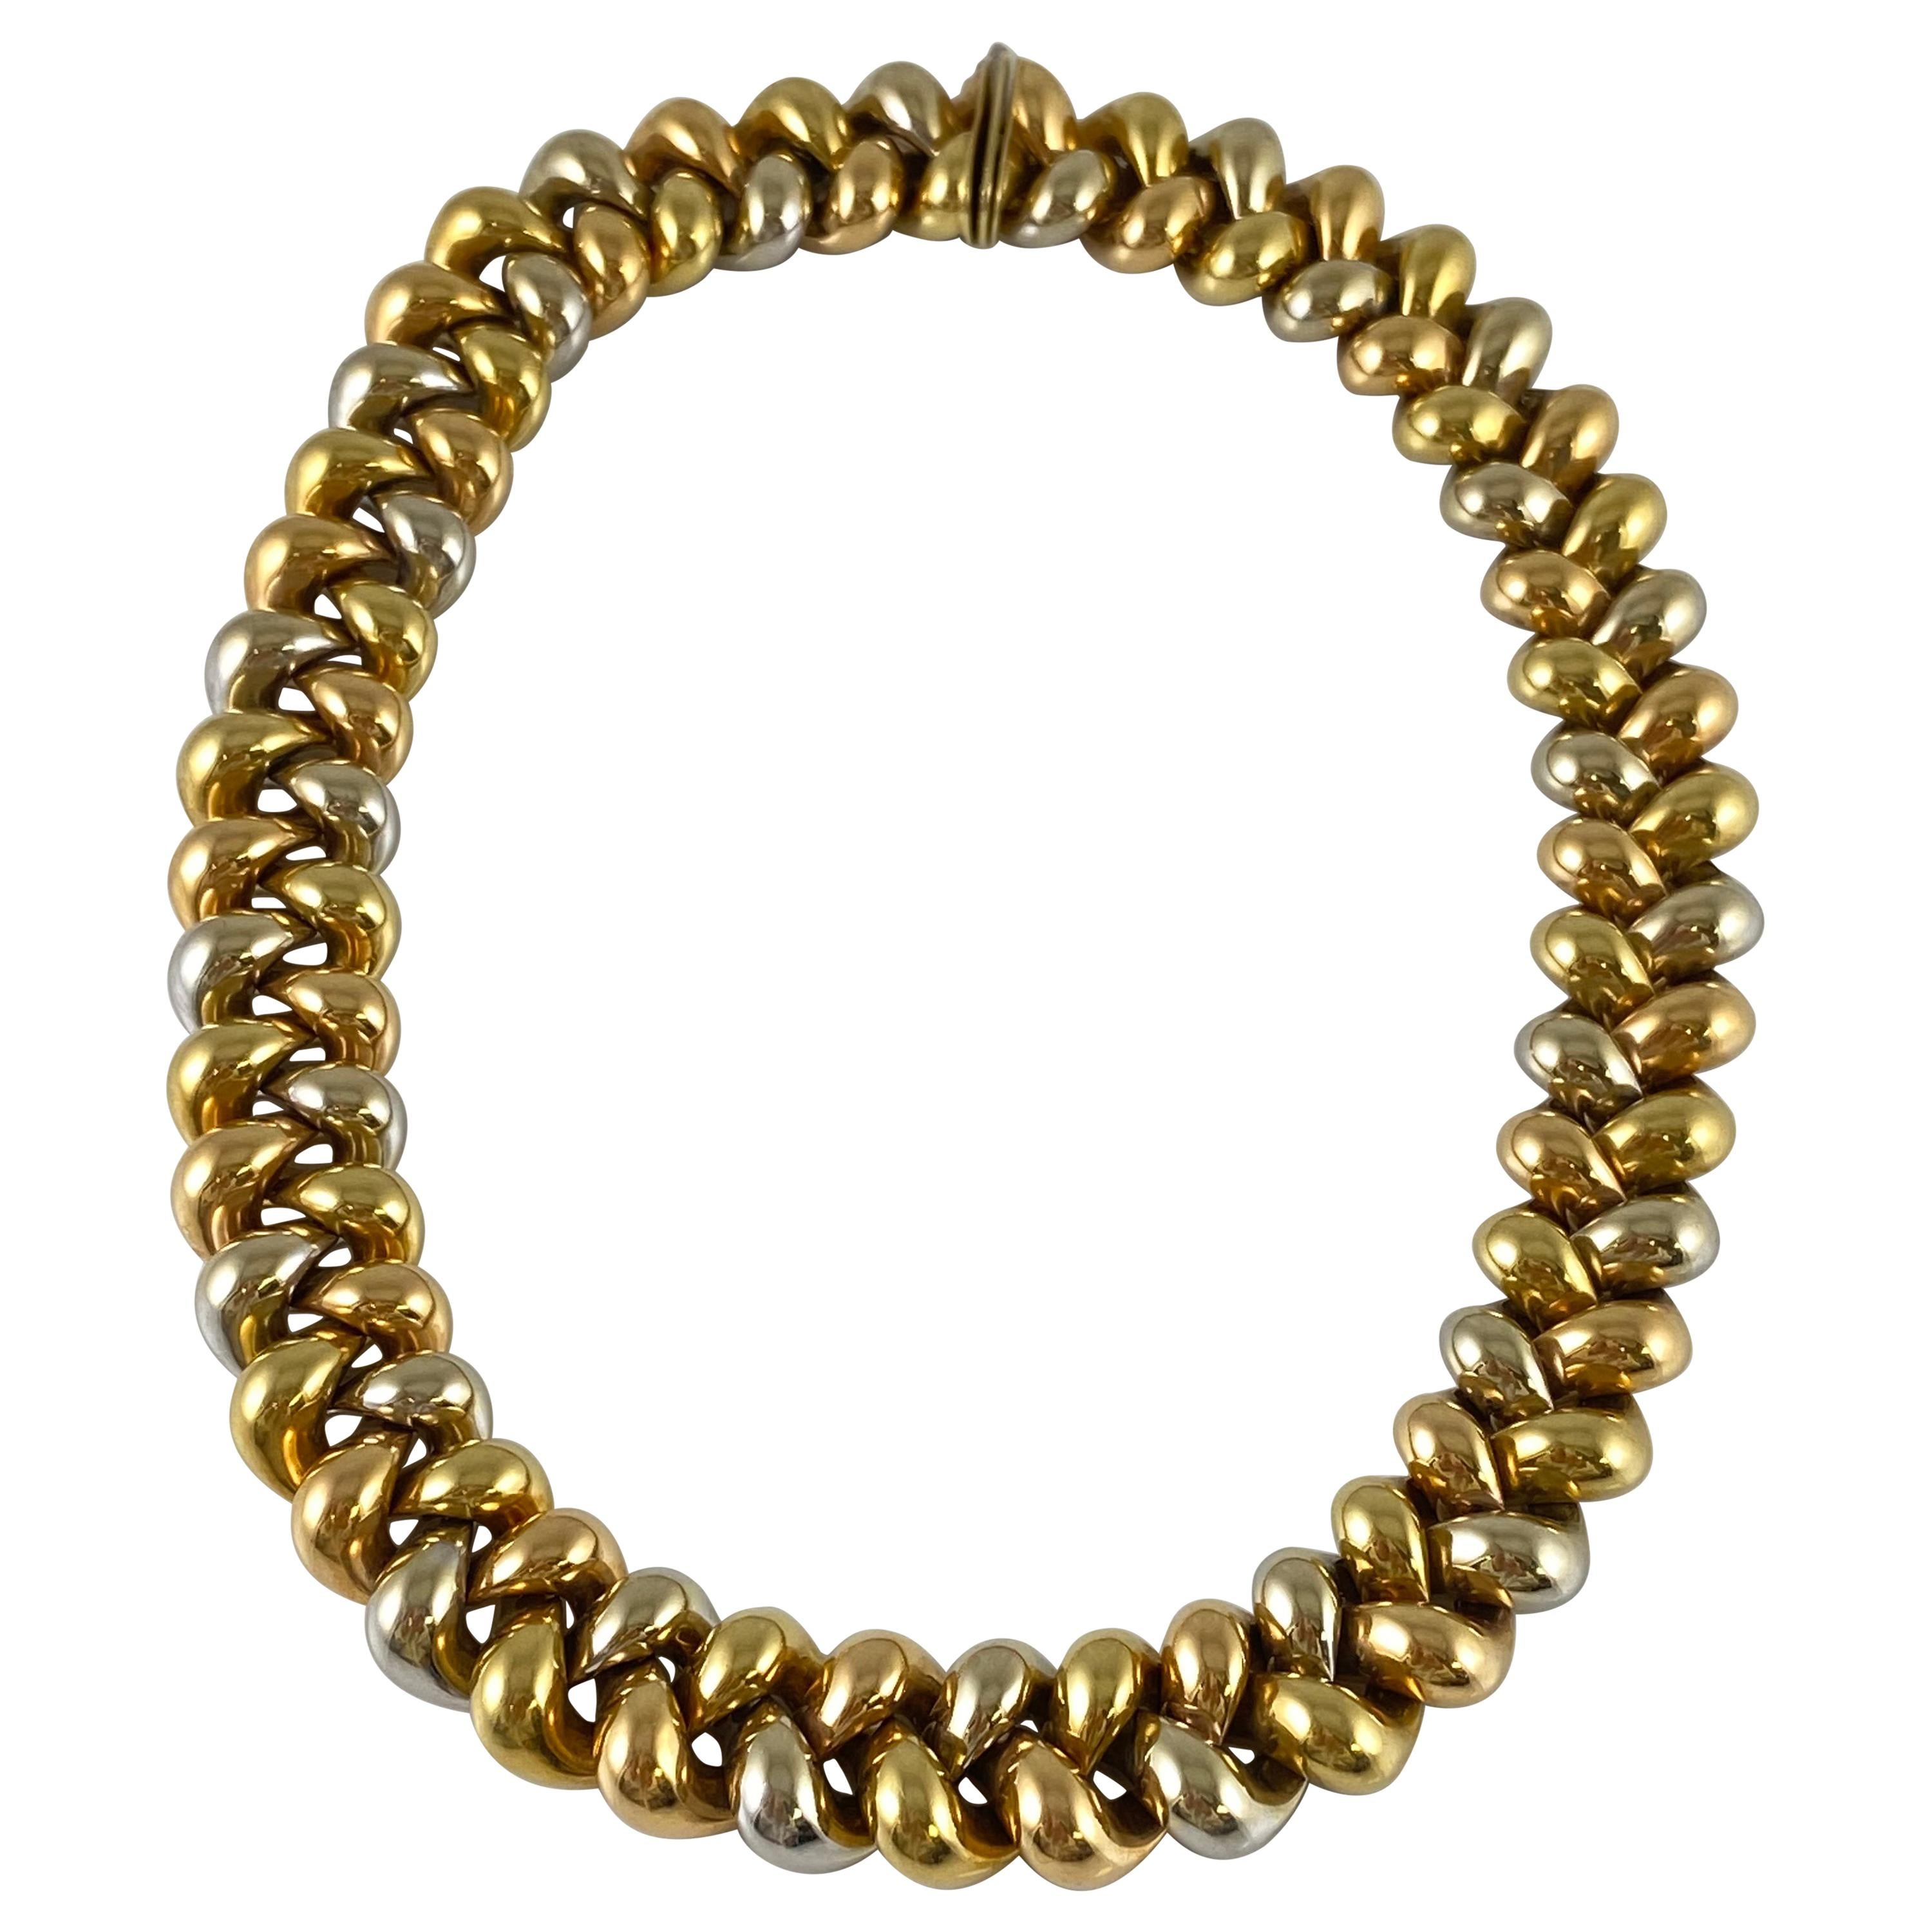 Braided Style 18 Karat Two-Tone Gold Necklace